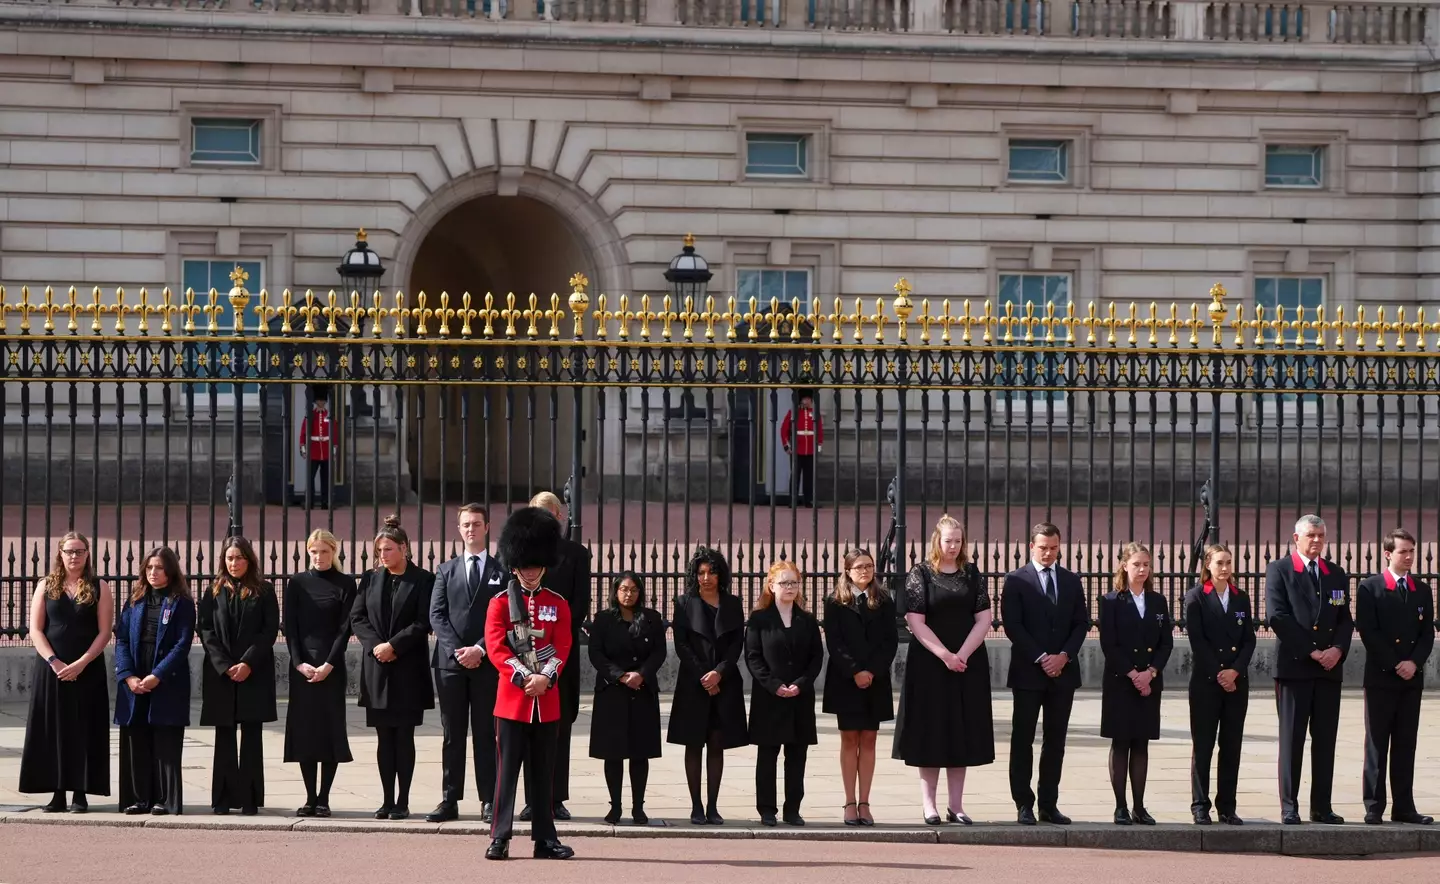 Buckingham Palace staff paying their respects to the Queen.